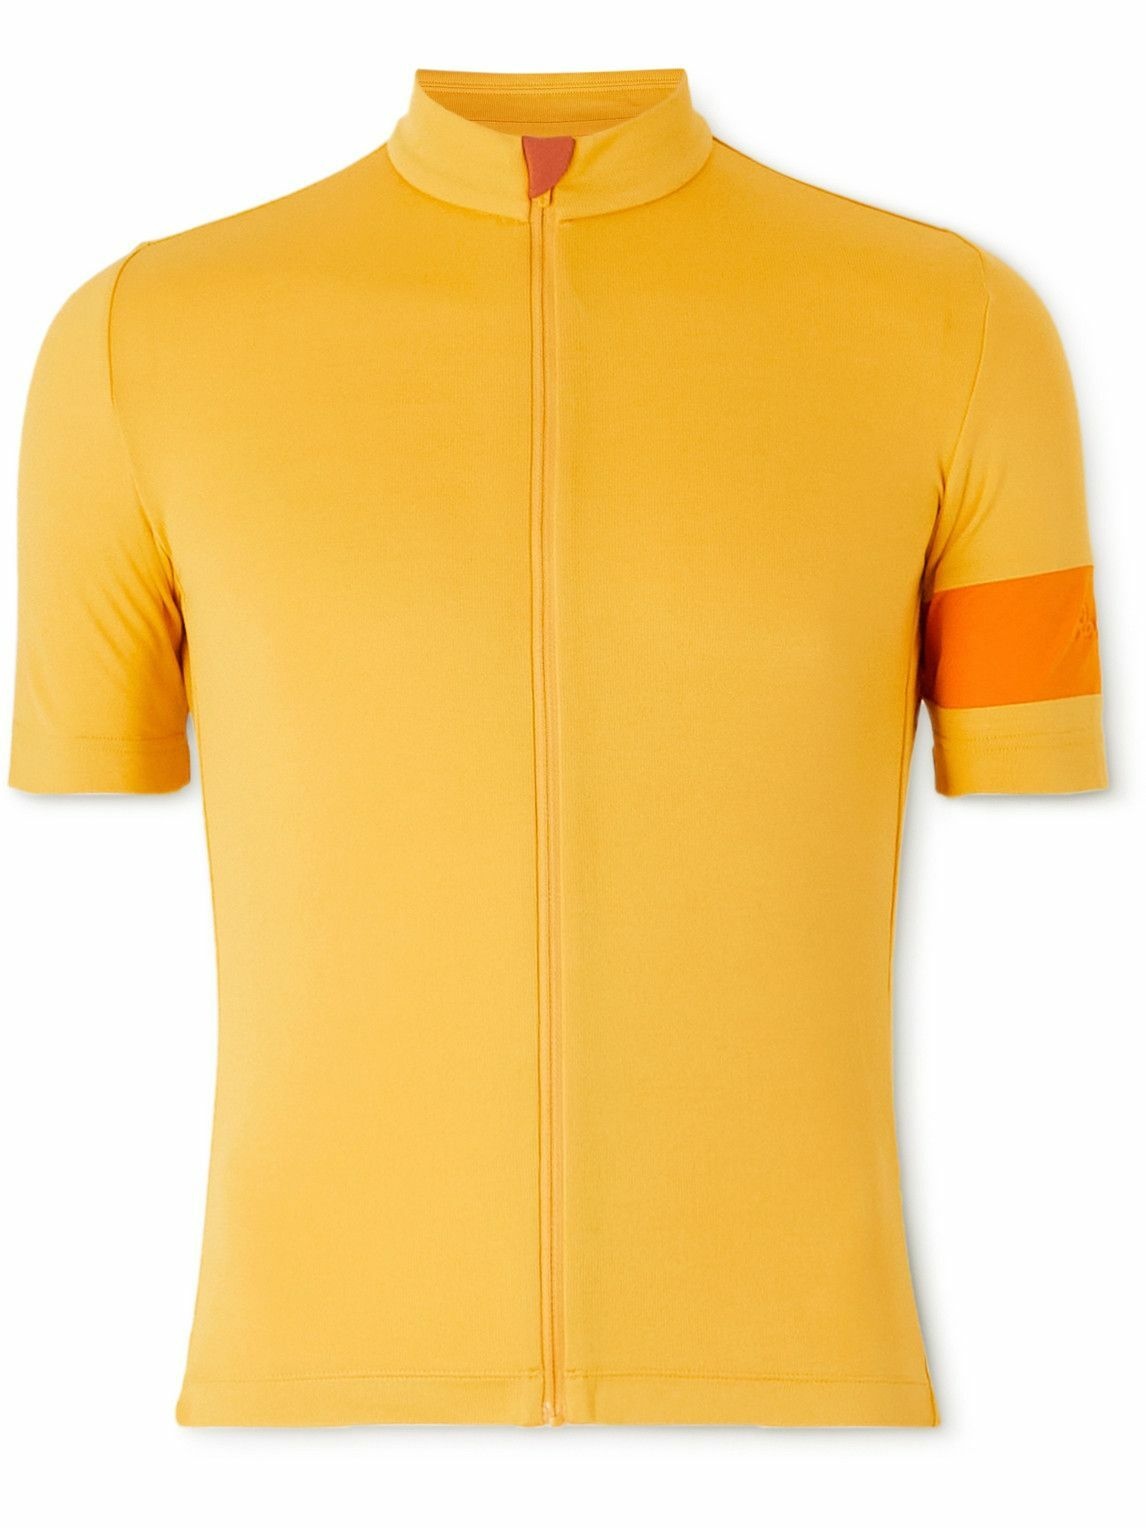 Rapha - Classic Two-Tone Recycled Cycling Jersey - Yellow Rapha